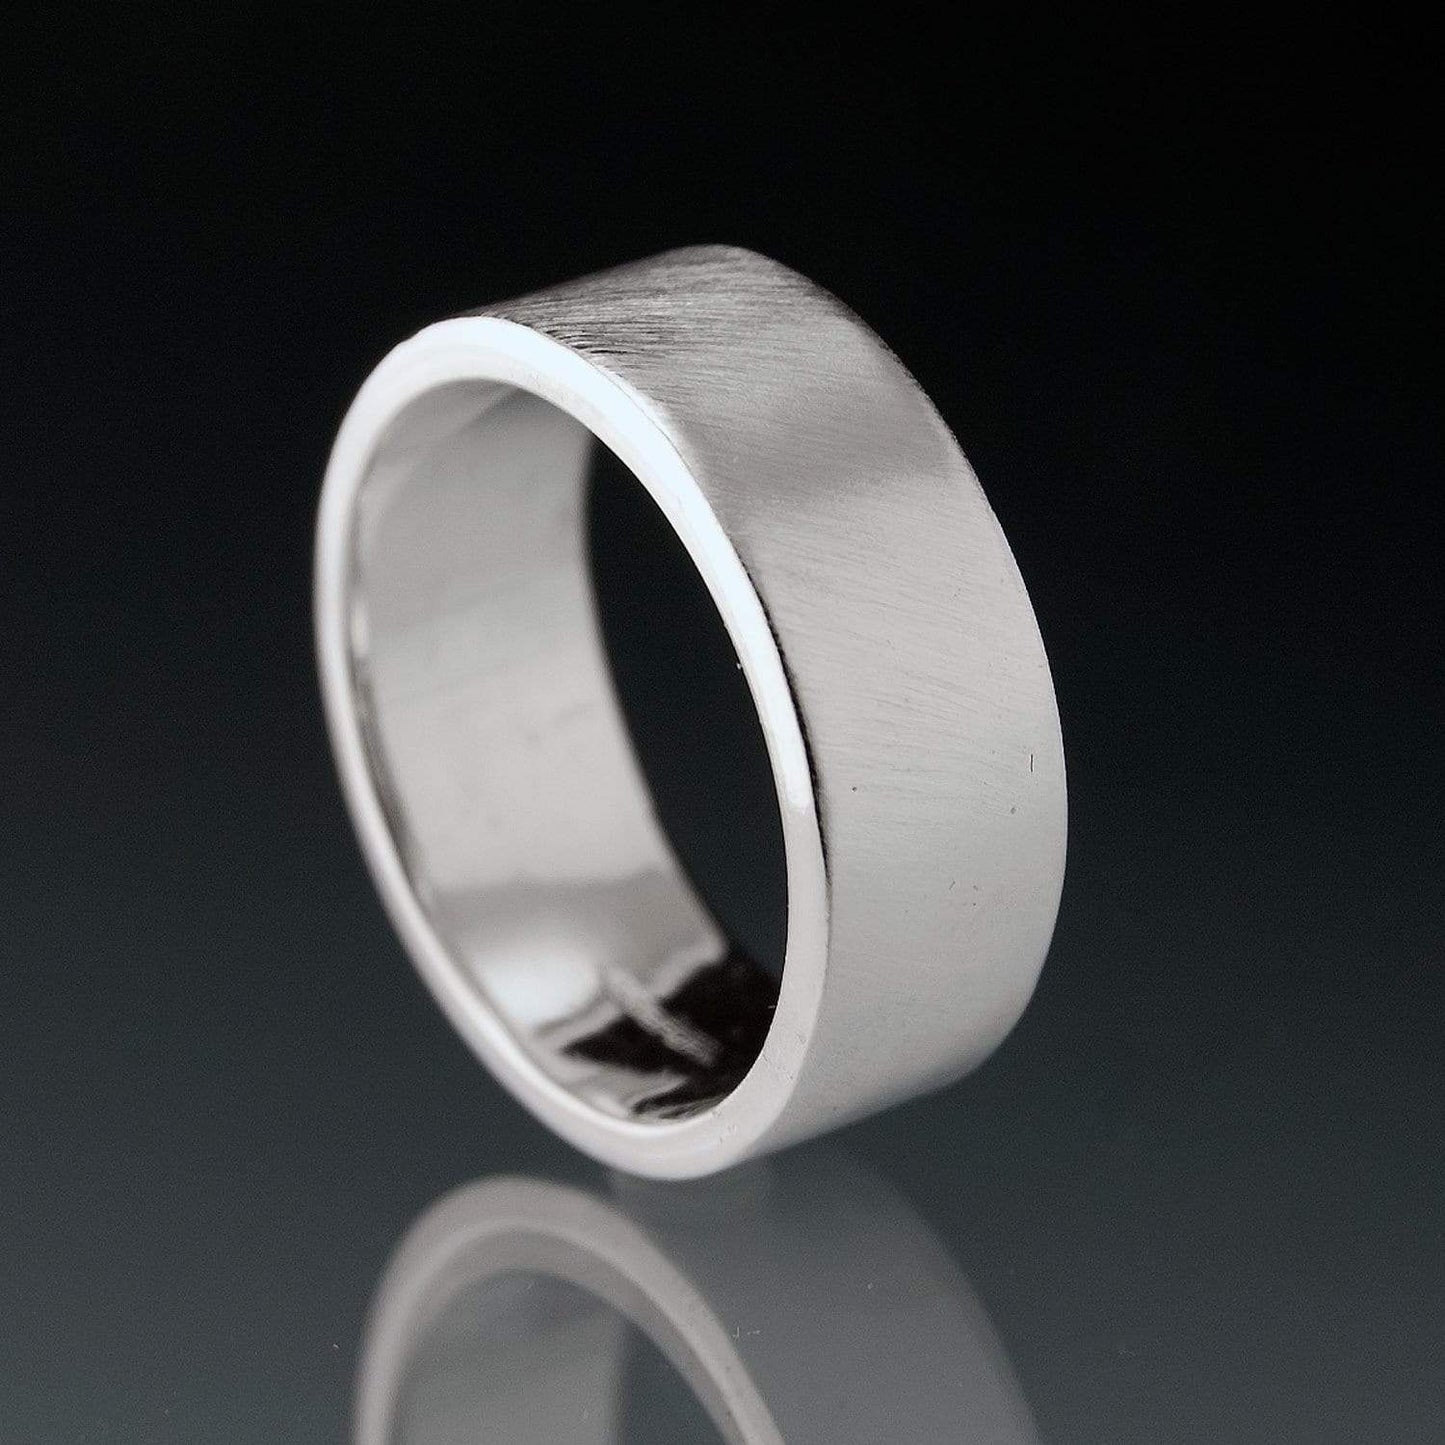 Wide Flat Modern Simple Wedding Band Sterling Silver / 4mm Ring by Nodeform